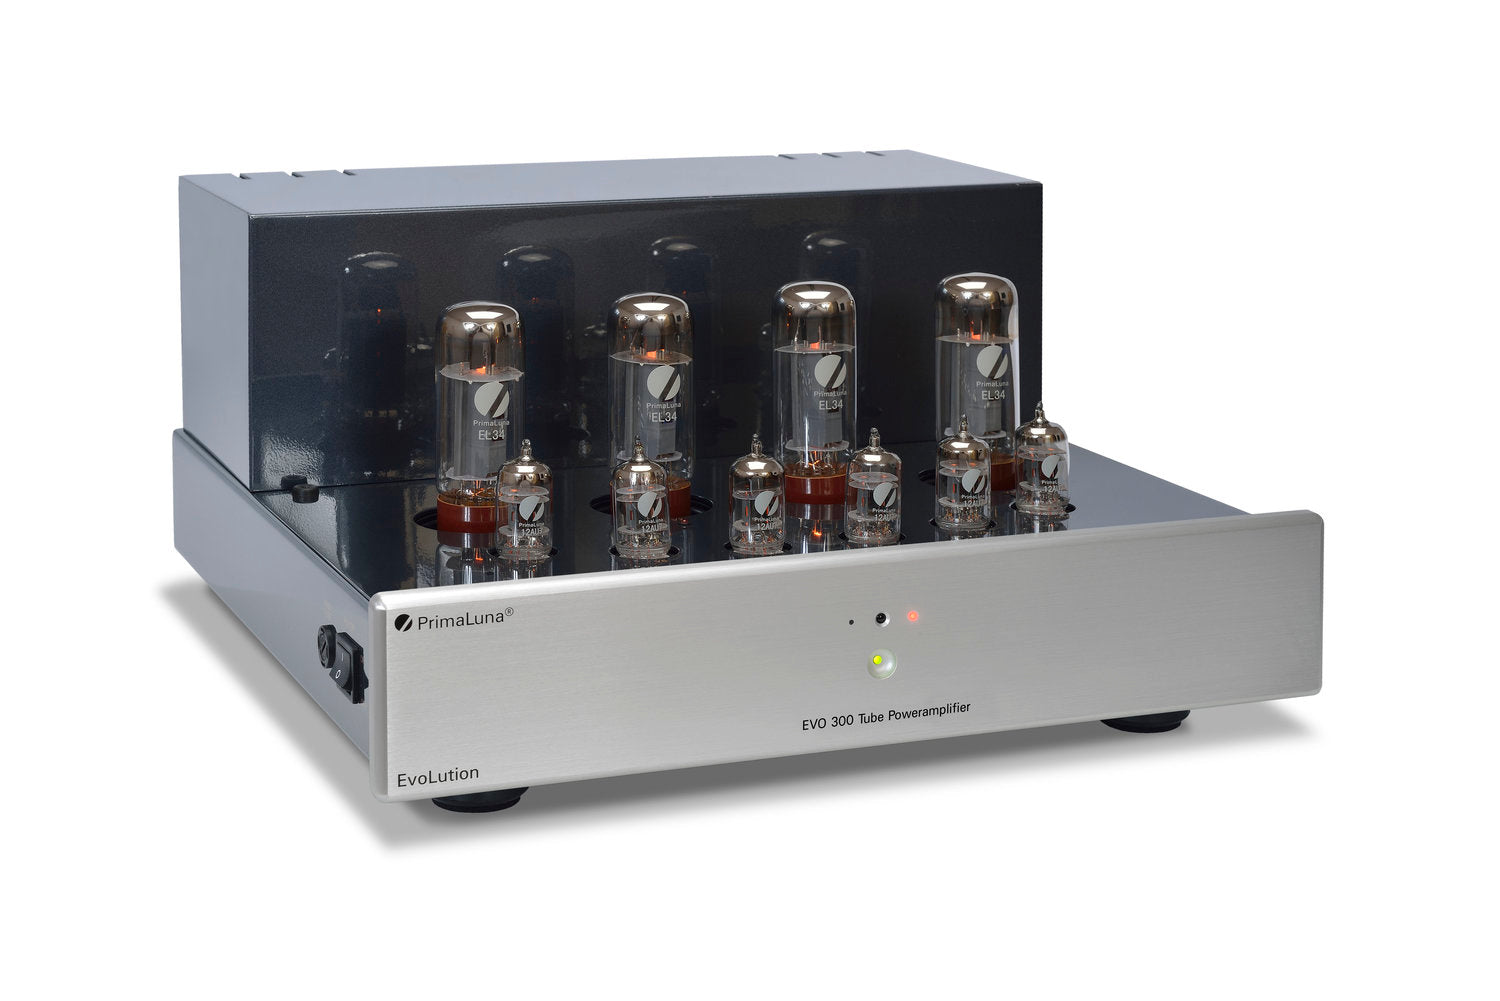 PRIMALUNA EVO 300 TUBE POWER AMPLIFIER - Discover the high quality music at a very best price at Vinyl Sound. Check out the Integrated Amplifiers: PrimaLuna EVO 300, Primaluna evo 100, Primaluna evo 200, The Power Amplifiers: Primaluna evo 400, PrimaLuna Evo 30, Primaluna evo 100, The Preamplifiers: Primaluna evo 100, Primaluna evo 300, Tube-Hybrid Integrated, the PrimaLuna transformers...